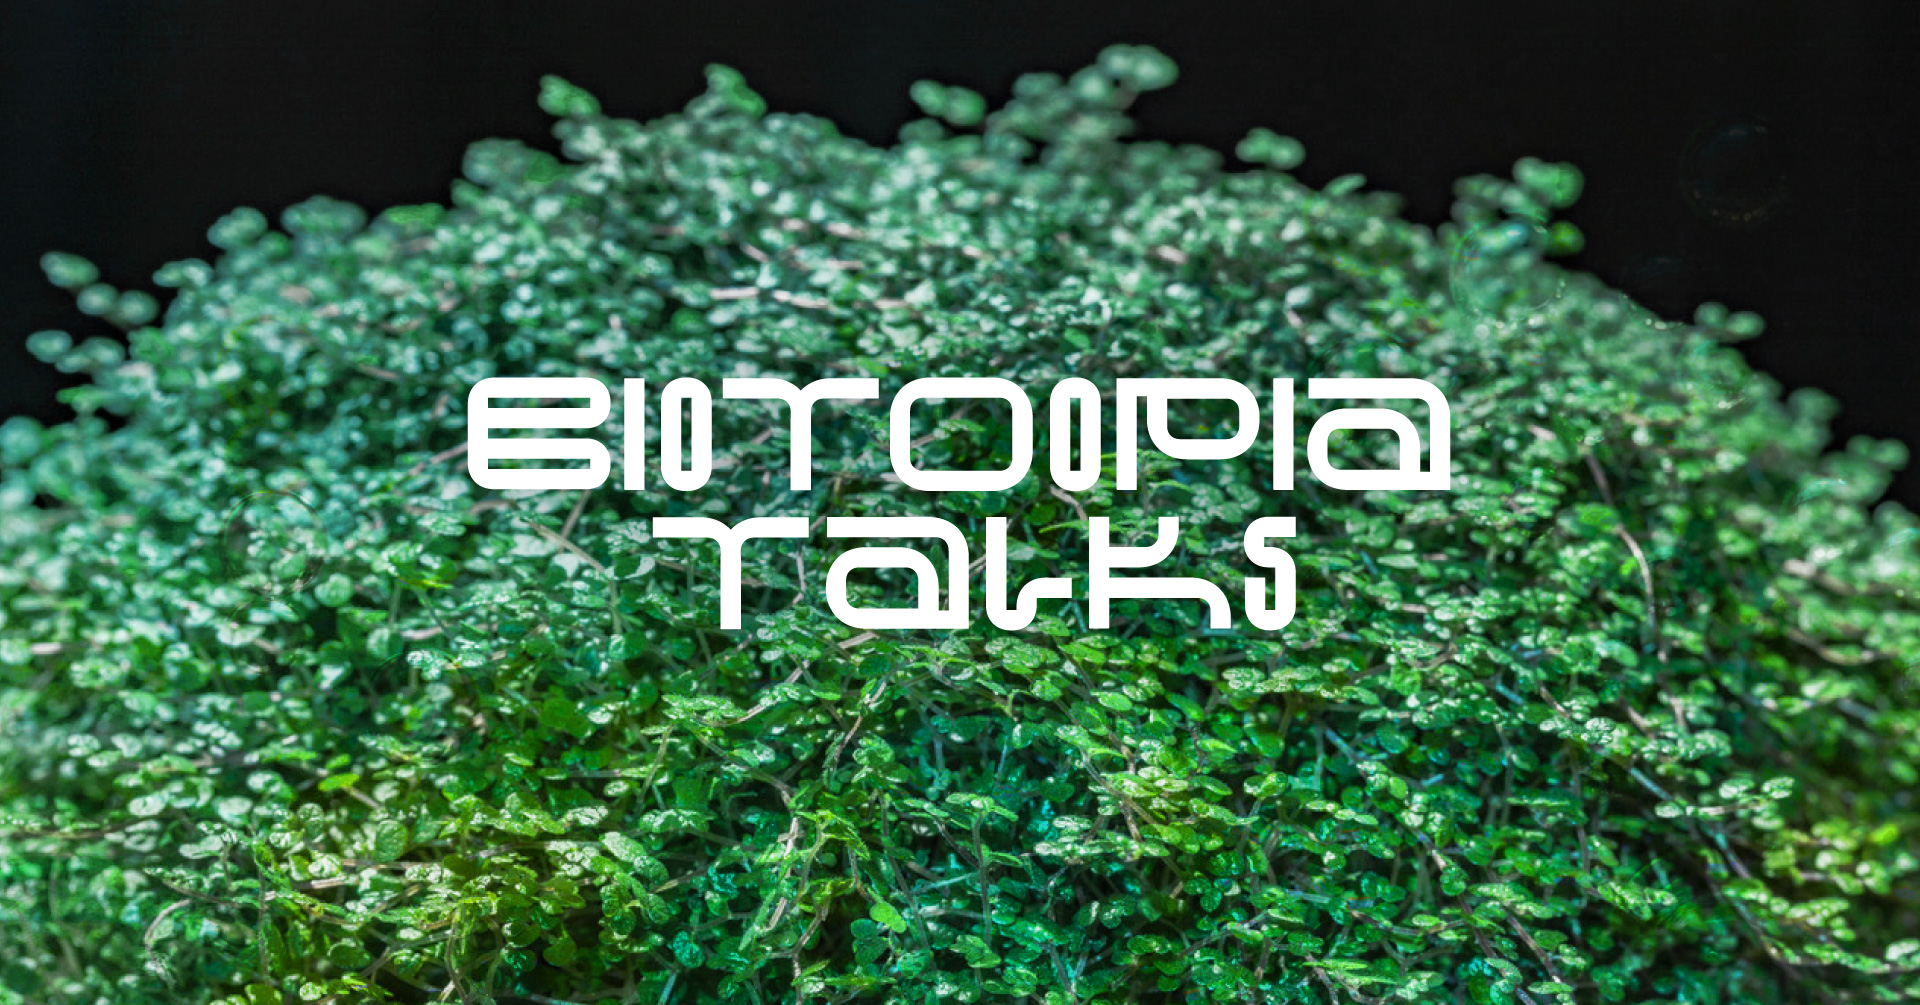 The final Biotoopia Talks of this year titled “Degrowths of Ecosystem” will bring the environmental philosophical method of thought to life. 